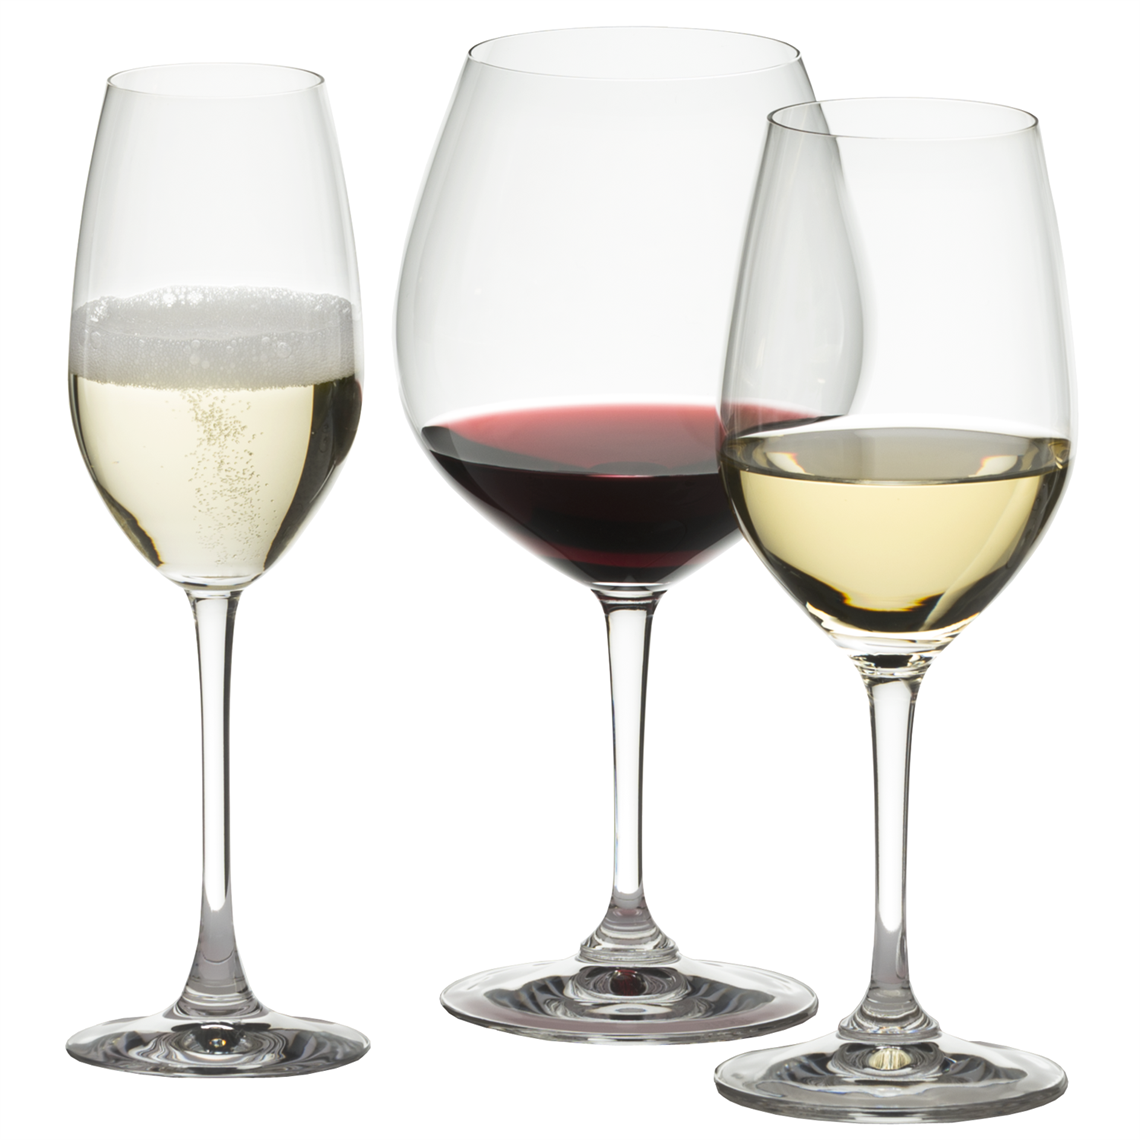 View more glass and co from our Restaurant & Trade Glasses range